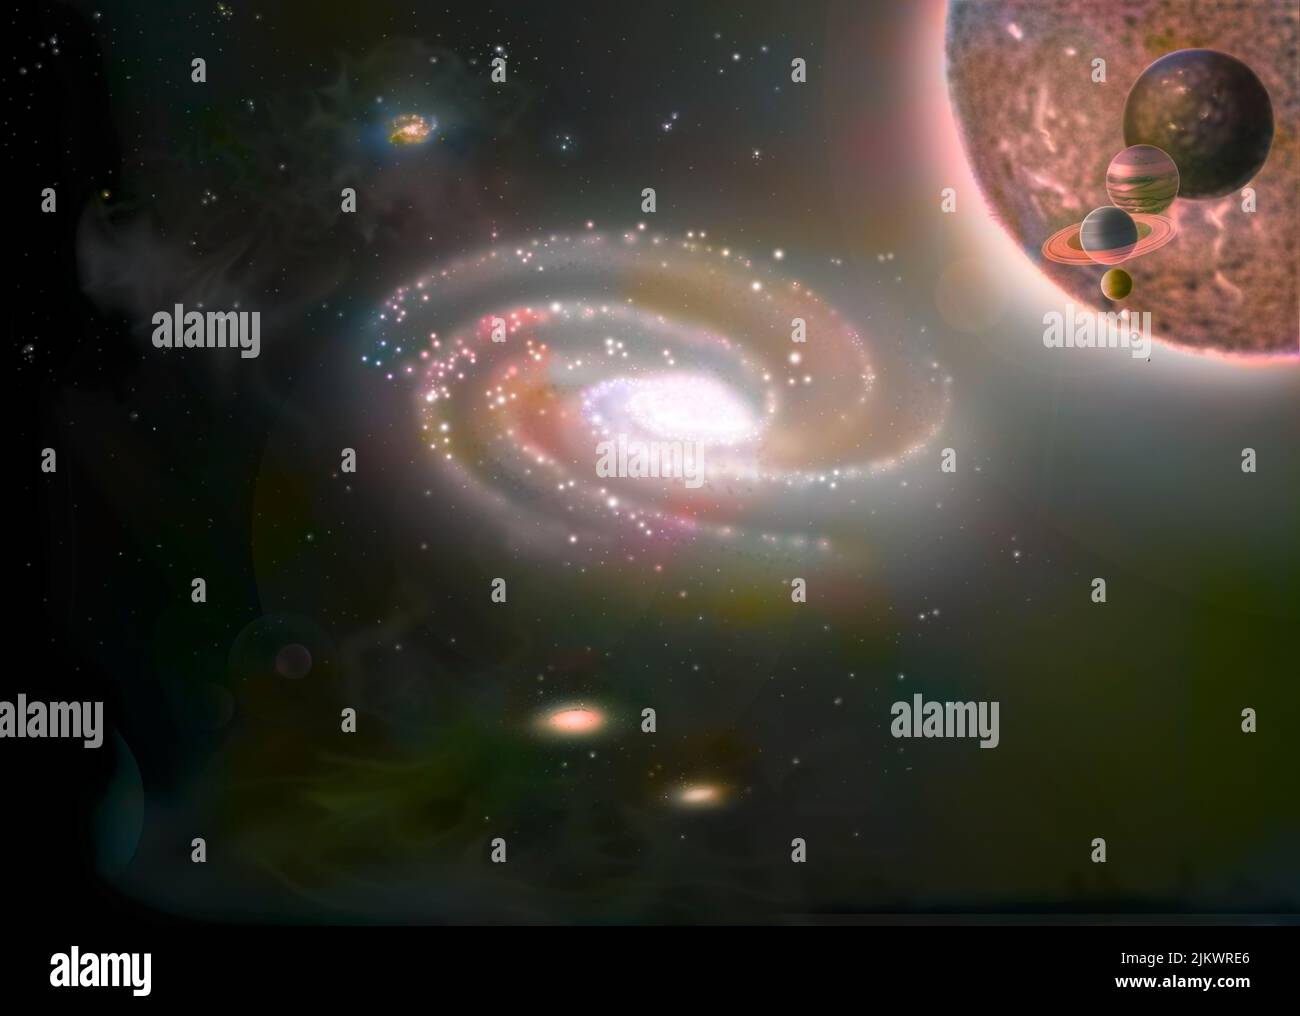 Milky Way in the center and scale of different stars (Red Dwarf, Sun.) On the right. Stock Photo